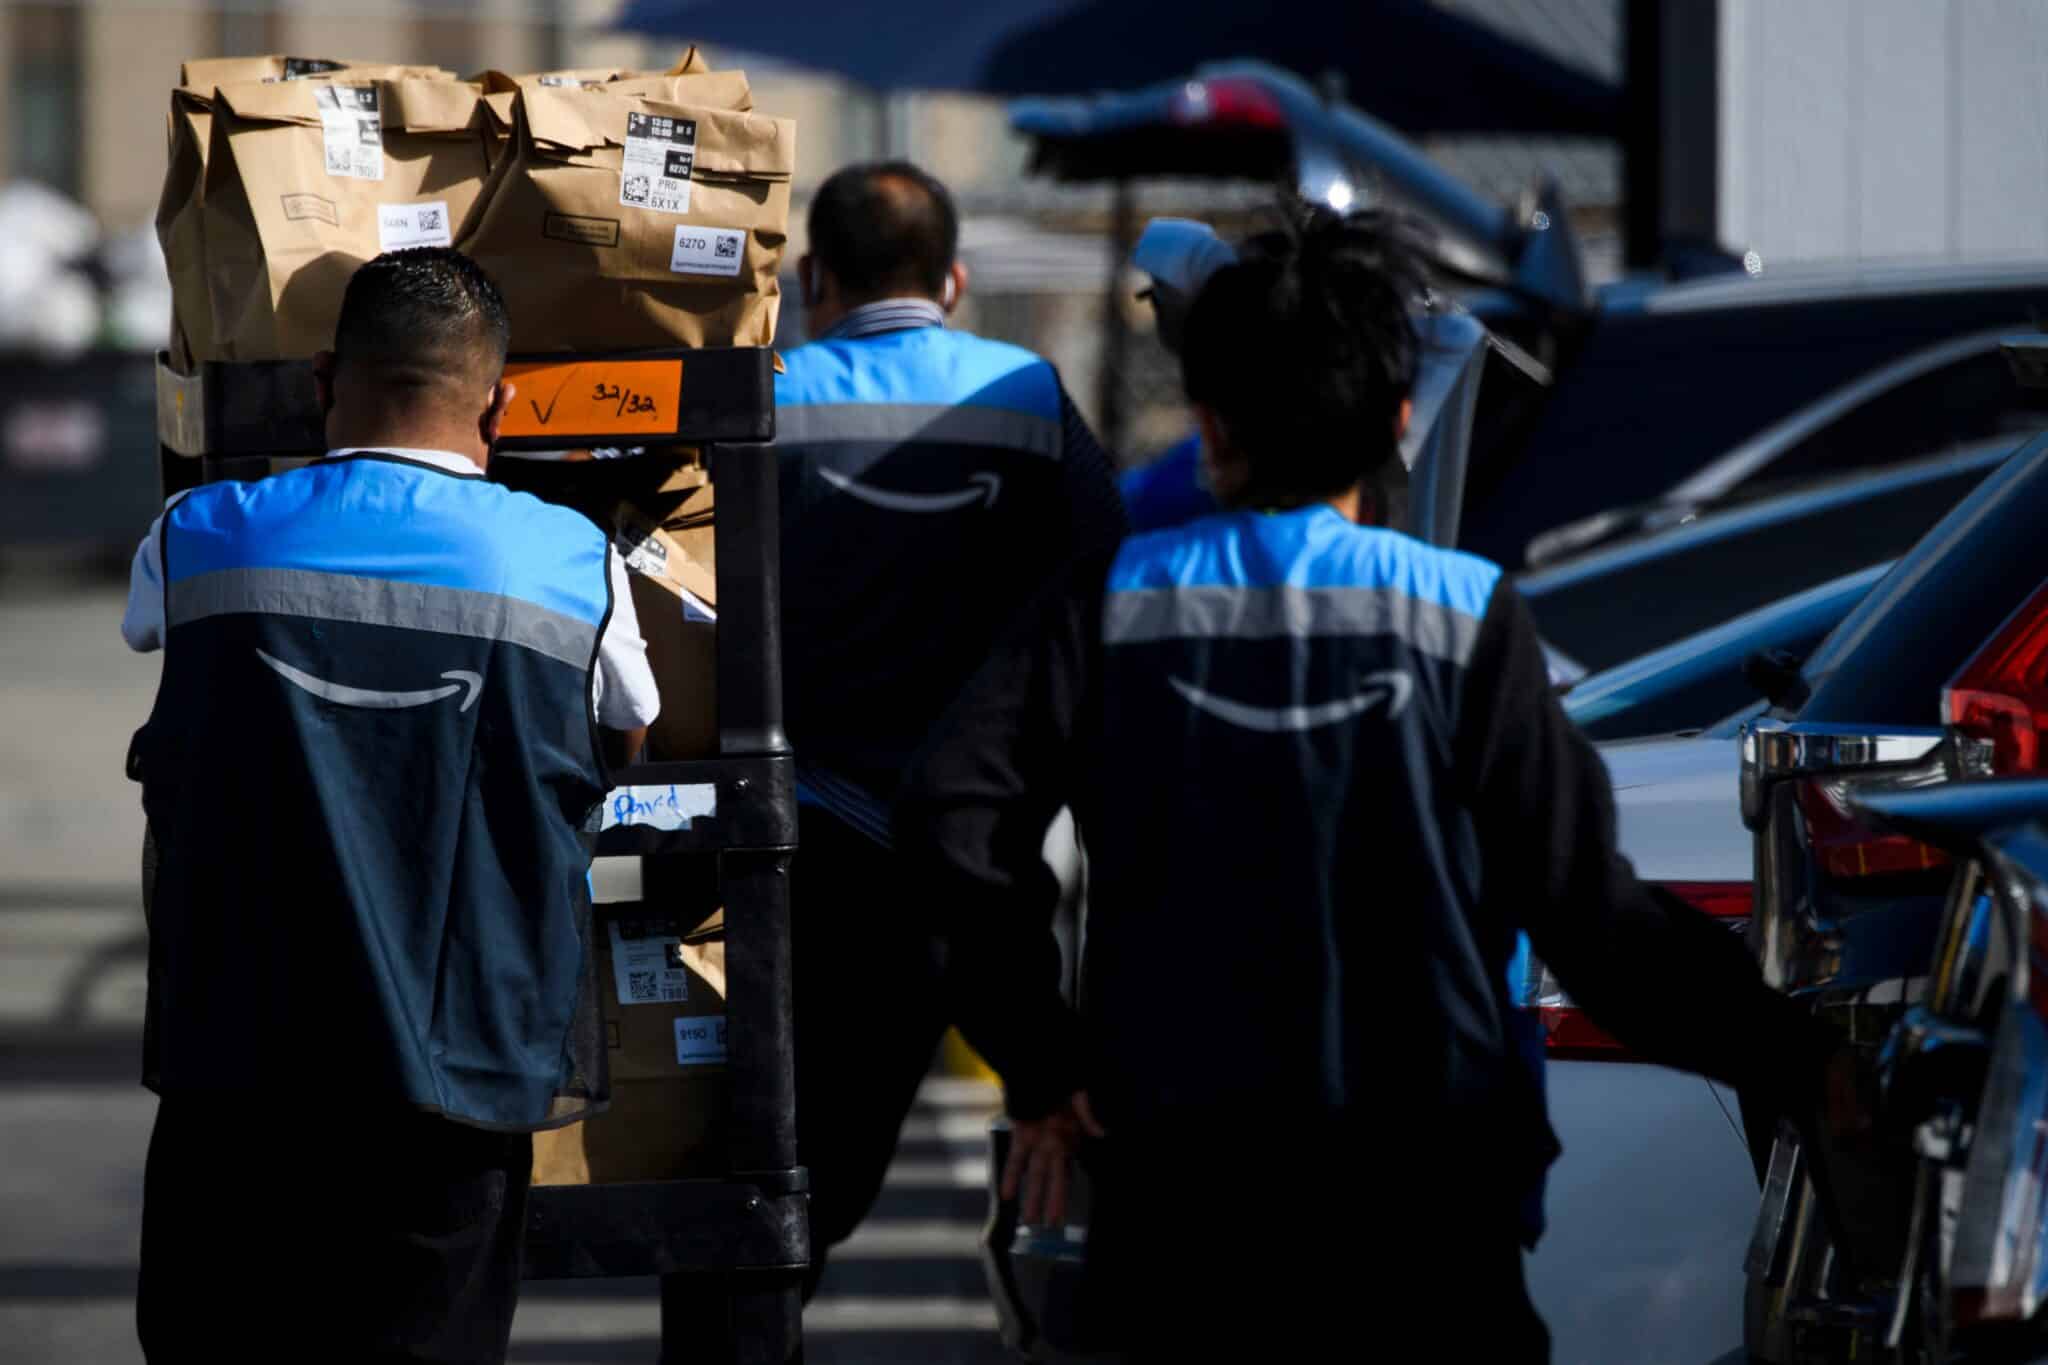 An Amazon.com Inc. delivery driver scans bags of groceries while loading a vehicle outside of a distribution facility on February 2, 2021 in Redondo Beach, California. - Jeff Bezos said February 1, 2021, he would give up his role as chief executive of Amazon later this year as the tech and e-commerce giant reported a surge in profit and revenue in the holiday quarter. The announcement came as Amazon reported a blowout holiday quarter with profits more than doubling to $7.2 billion and revenue jumping 44 percent to $125.6 billion. (Photo by Patrick T. FALLON / AFP) (Photo by PATRICK T. FALLON/AFP via Getty Images)